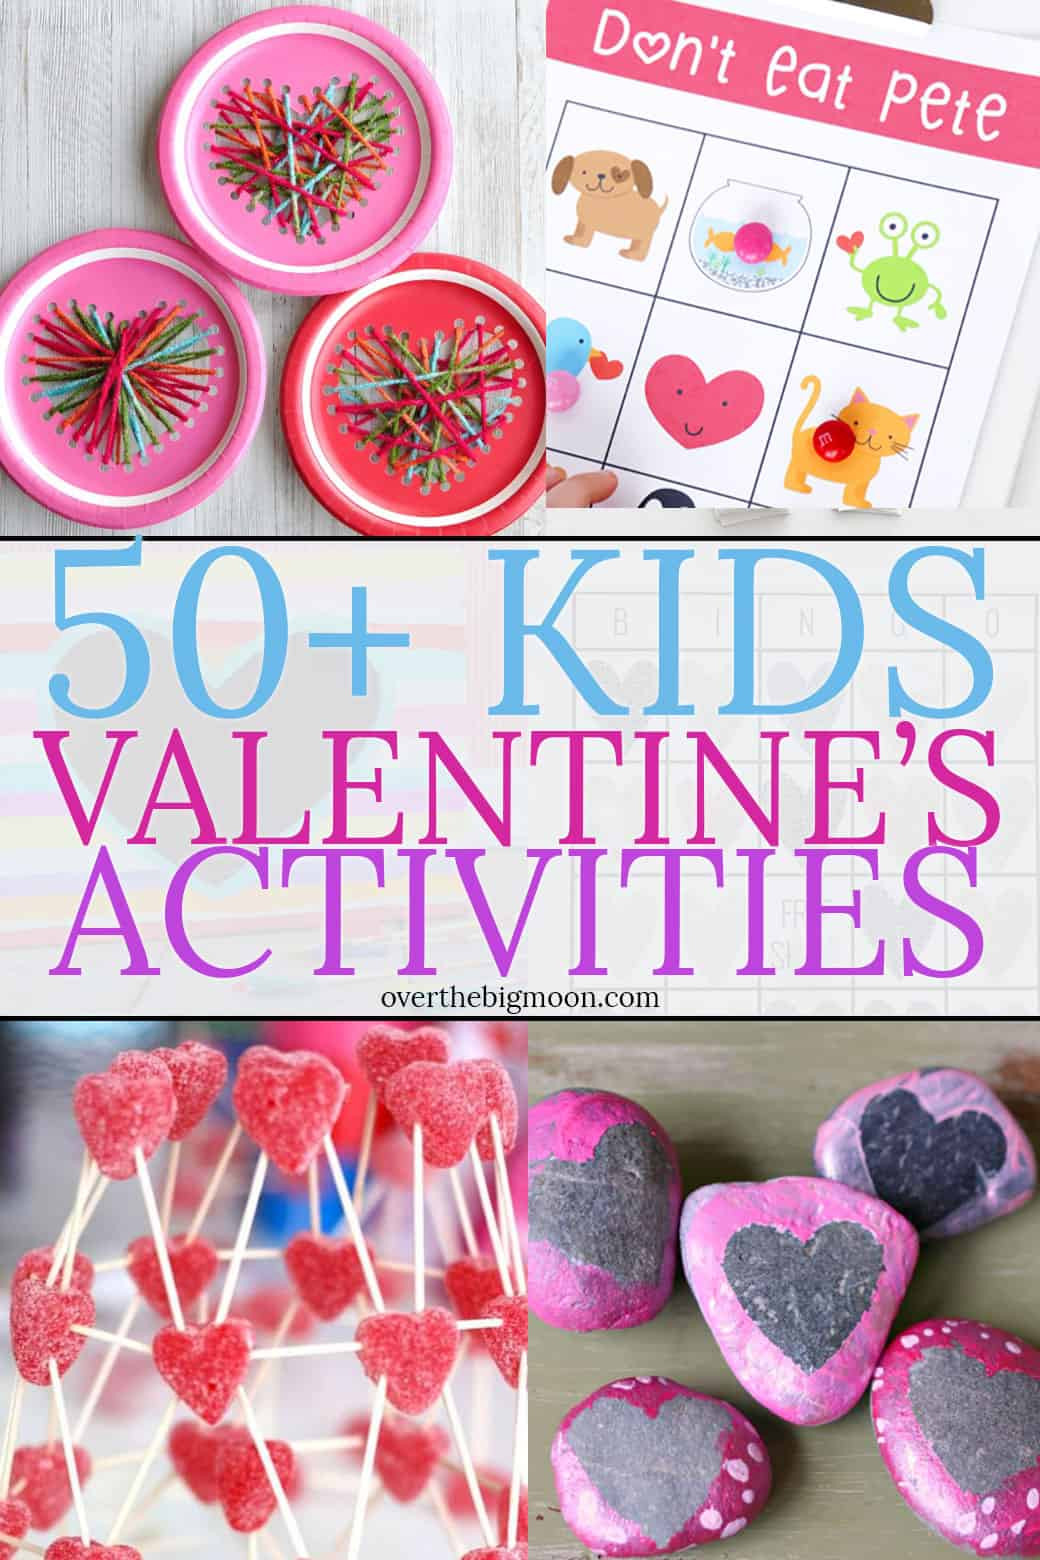 Valentines Day Events Ideas
 50 Valentine s Day Activities for Kids Over the Big Moon